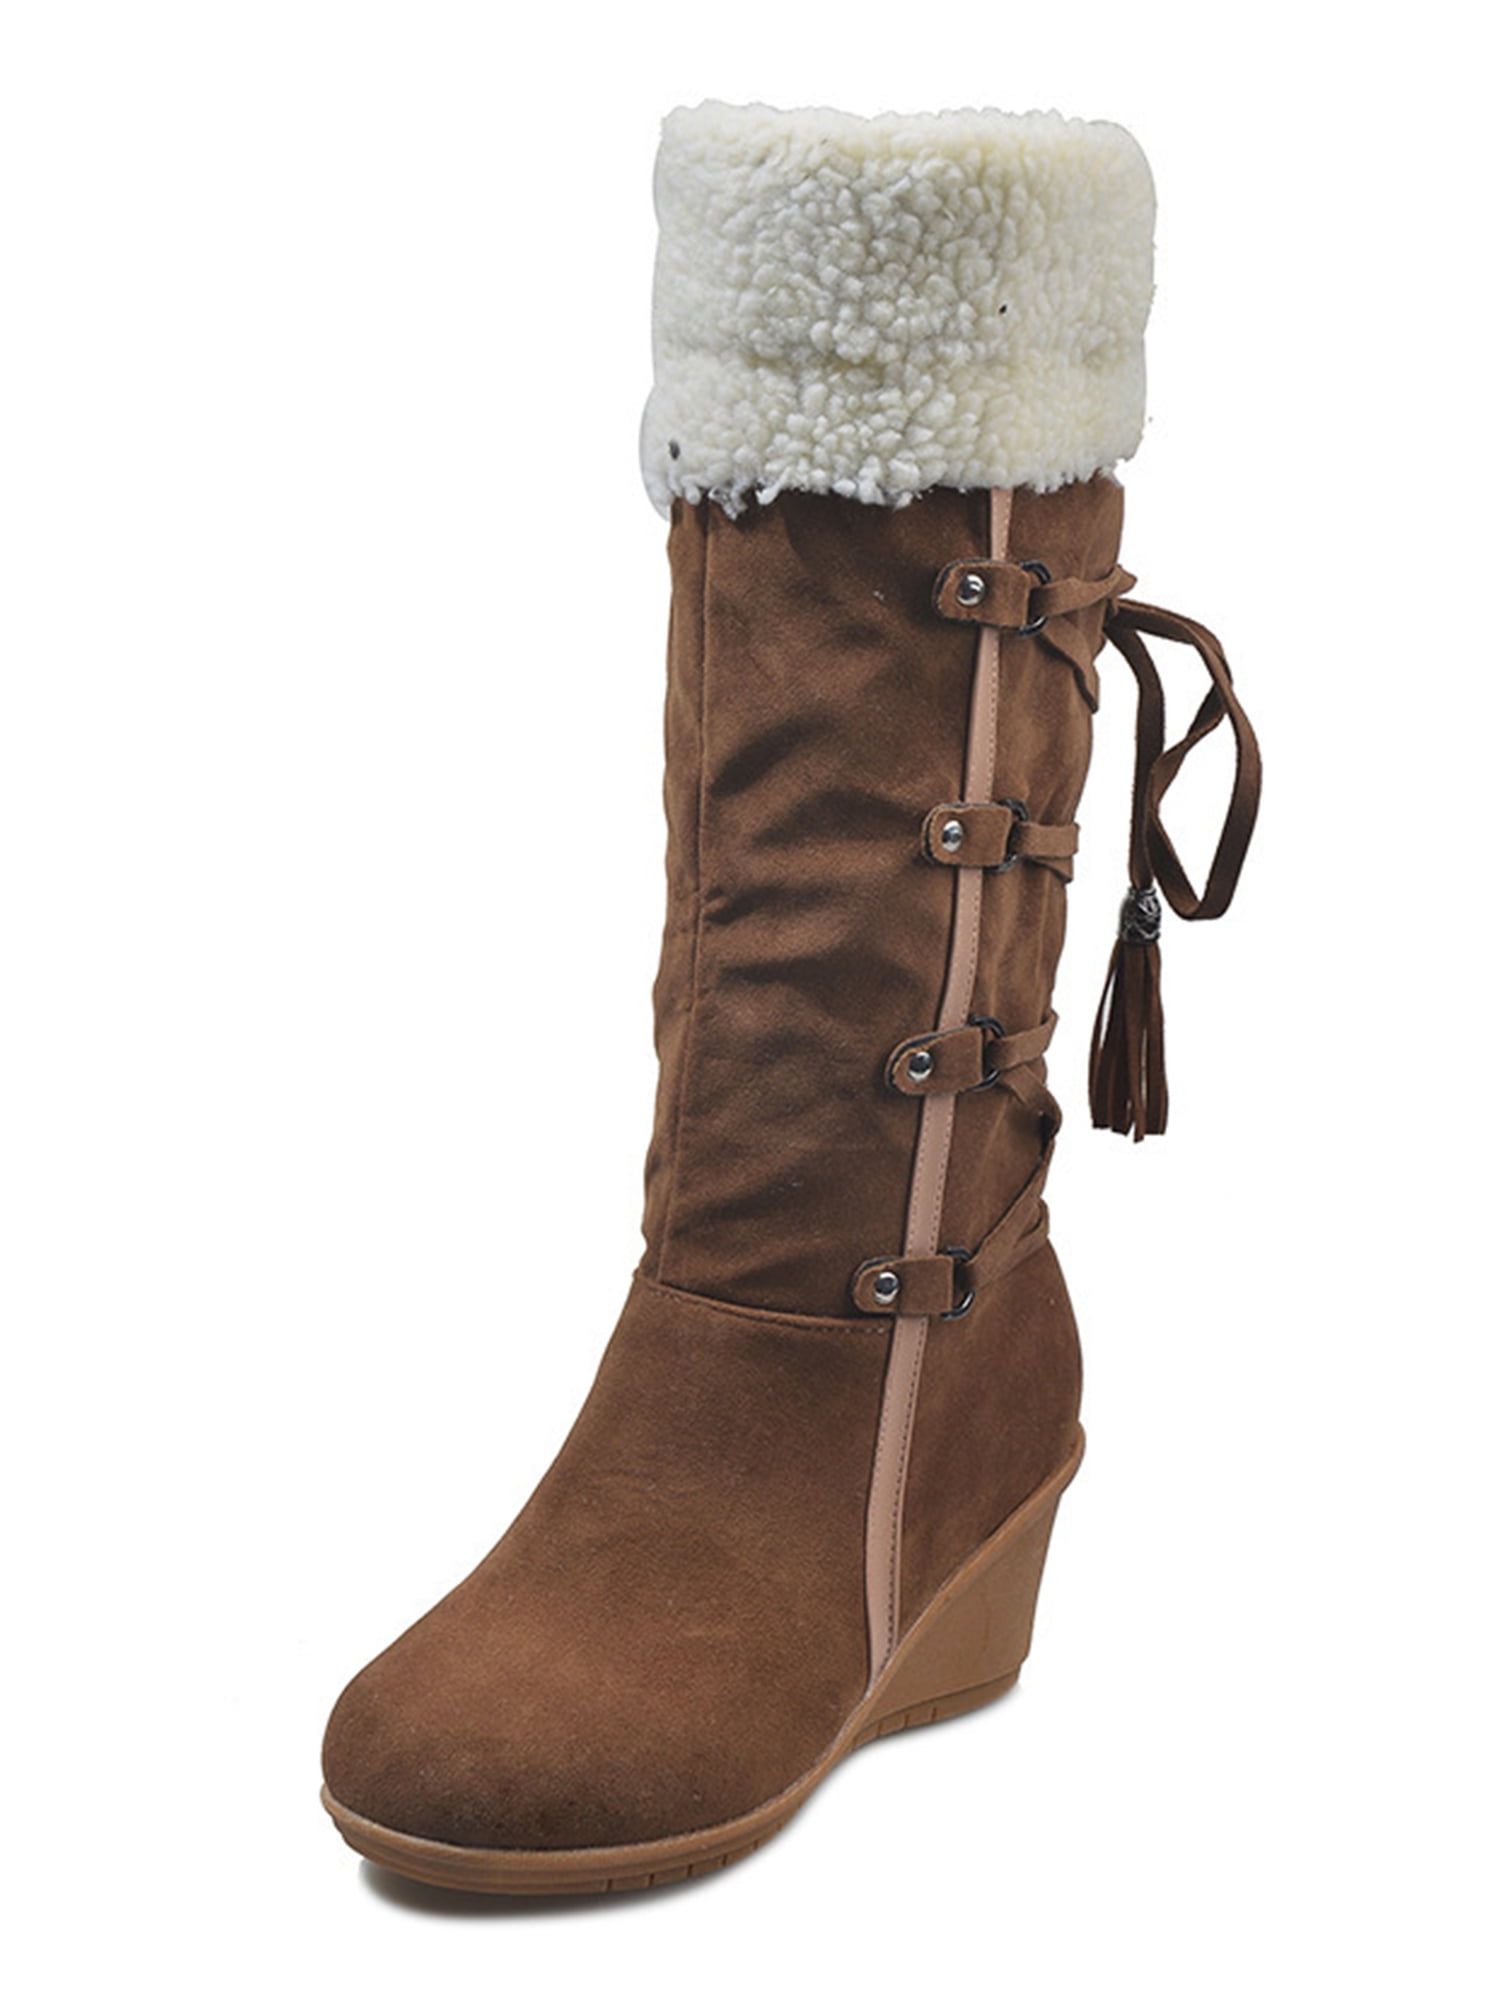 Details about   New Winter Women's Faux Fur Knee High Boots Block Heel Ladies Warm Thicken Shoes